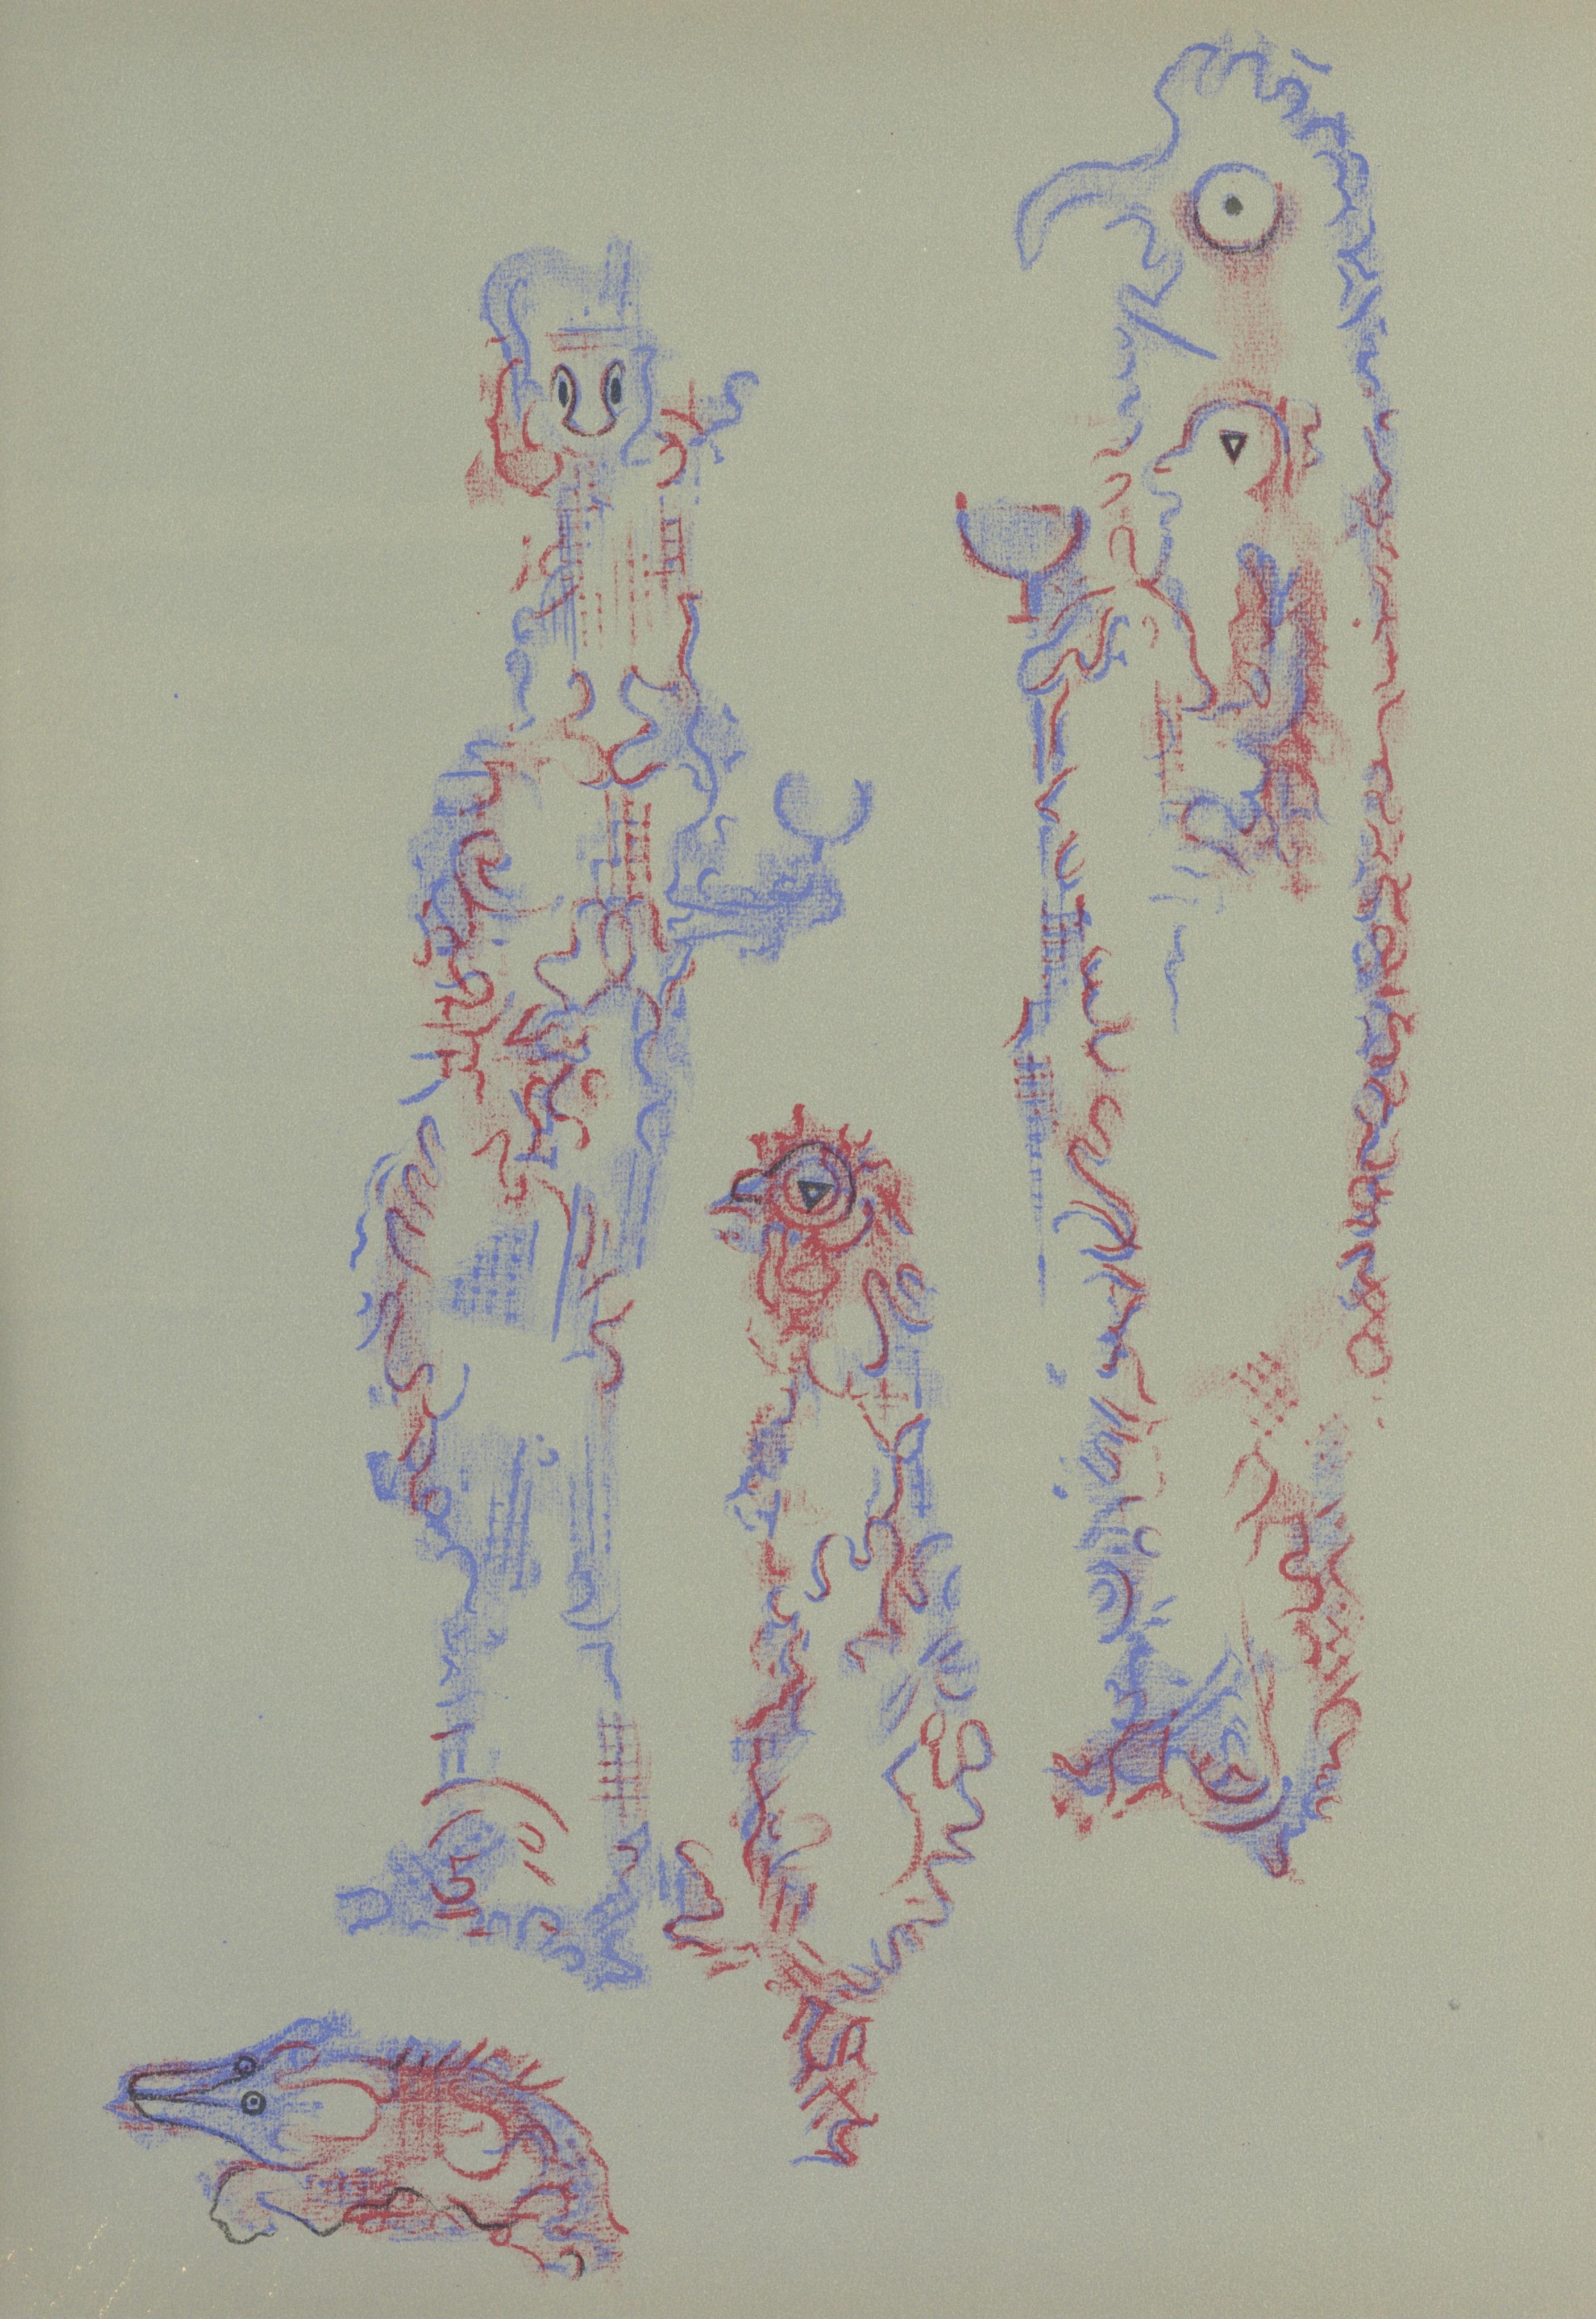 "Les chiens ont soif" lithograph - Print by (after) Max Ernst